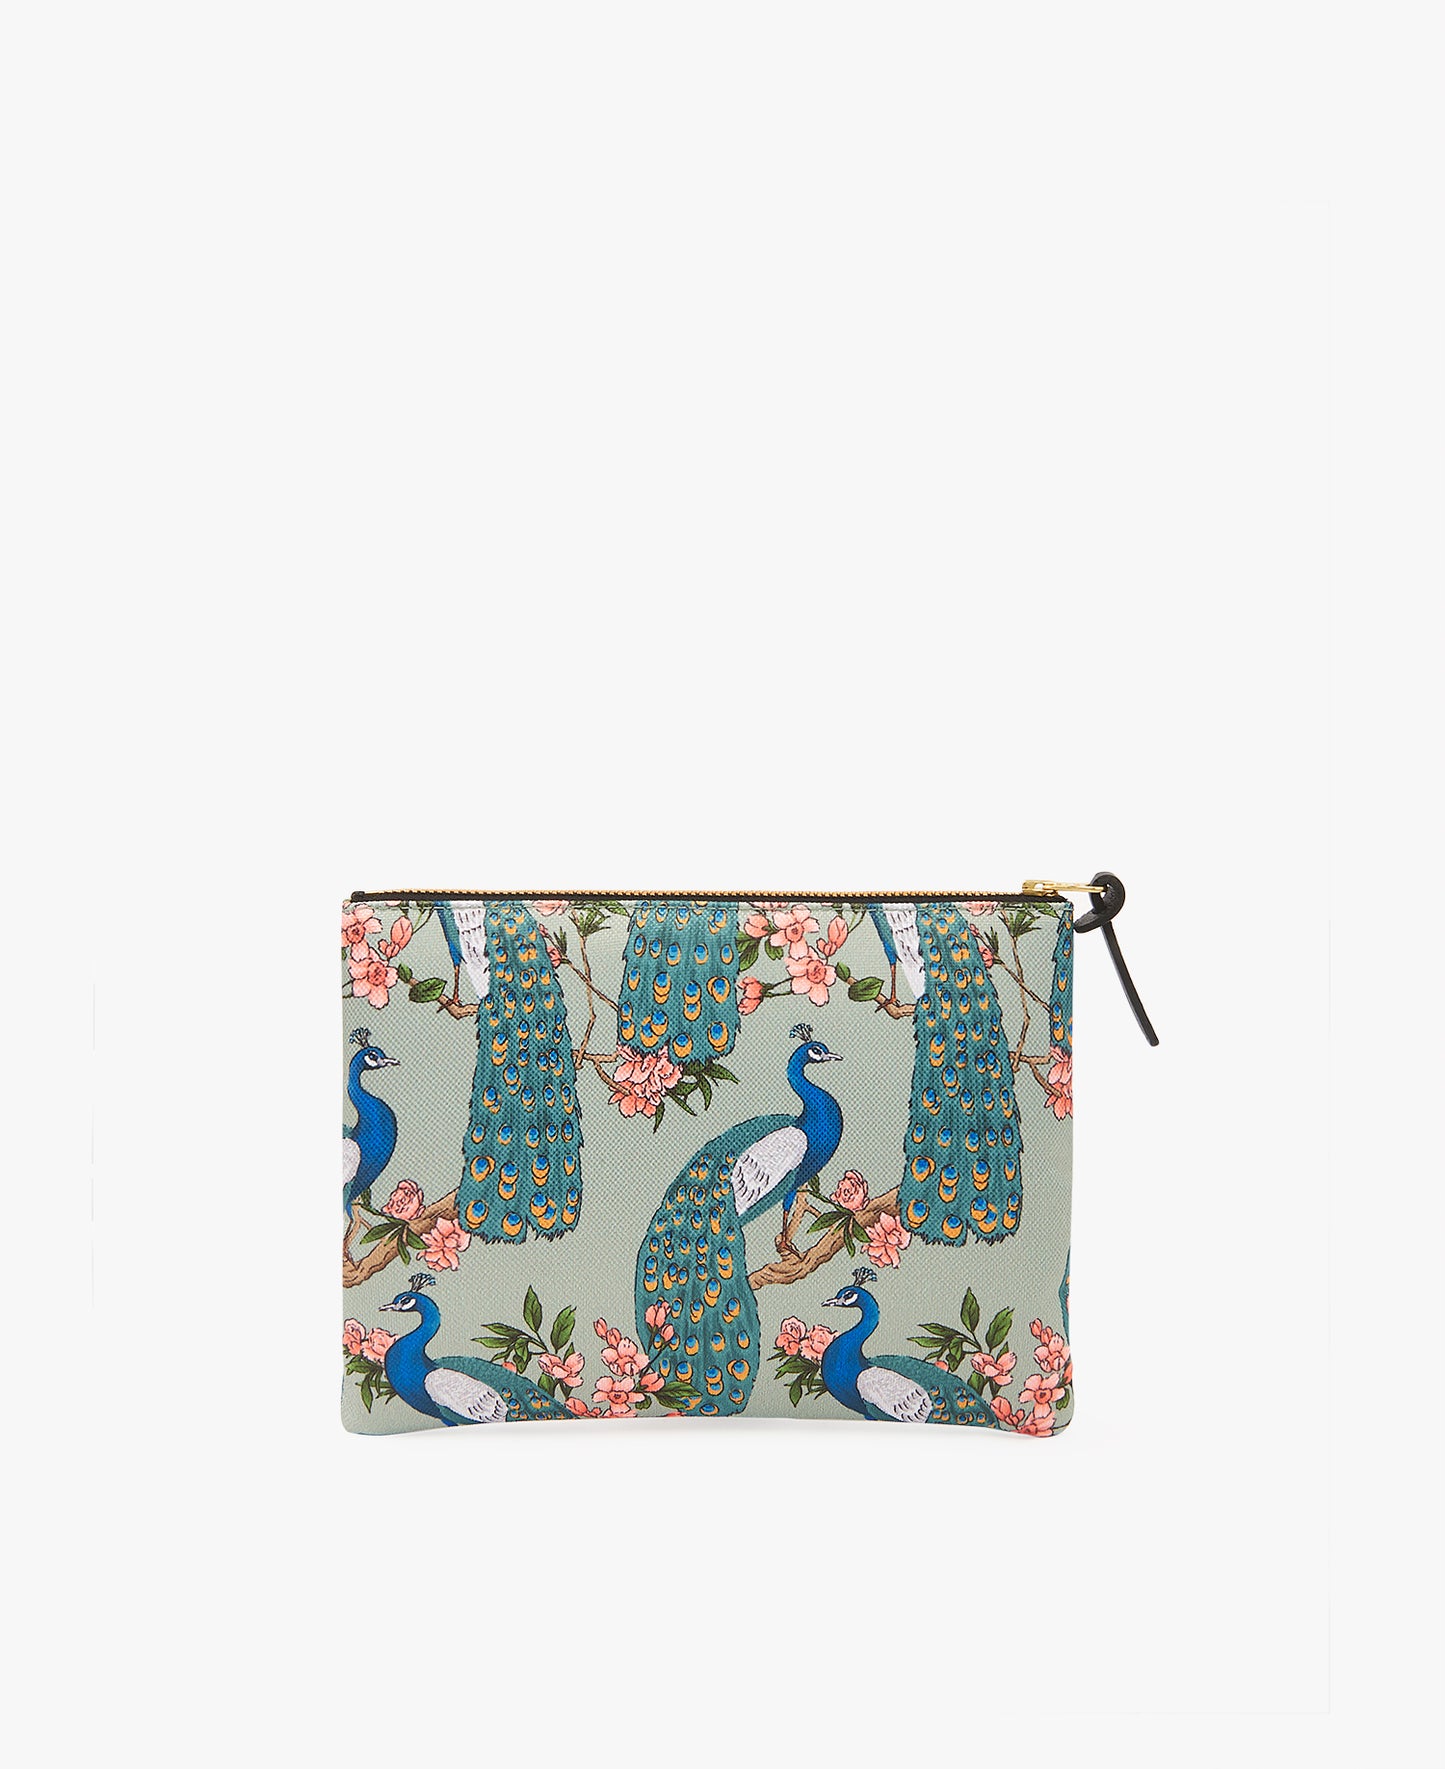 Pouch Bag - Royal Forest